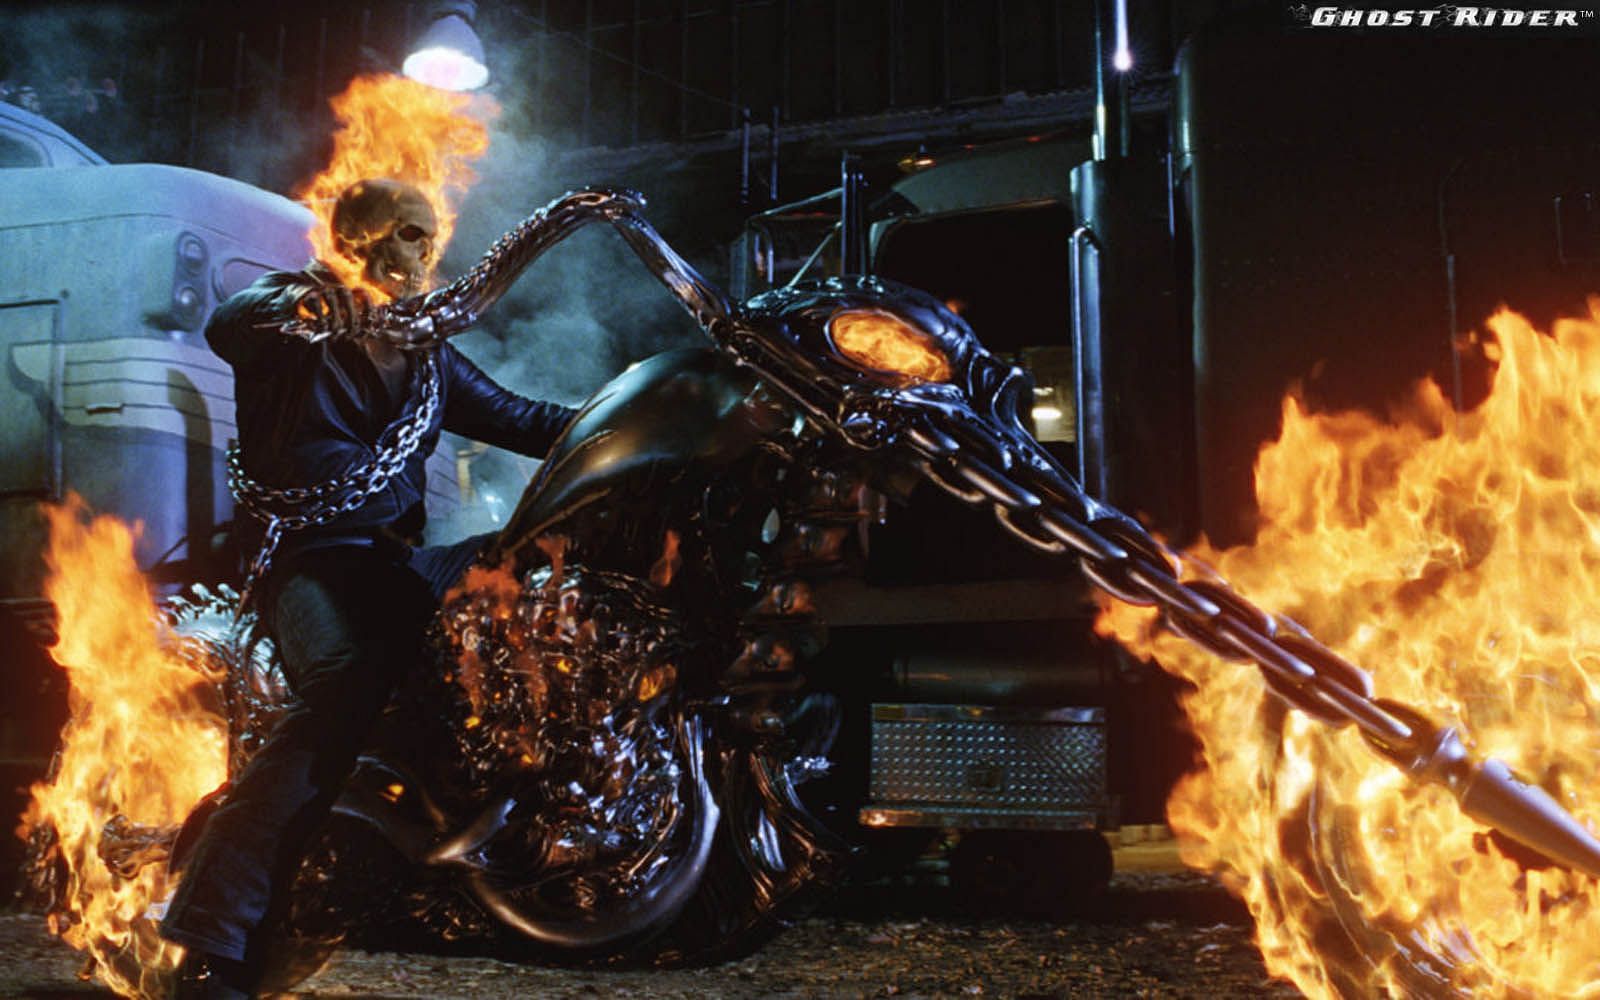 Ghost Rider (Image via Sony Pictures)